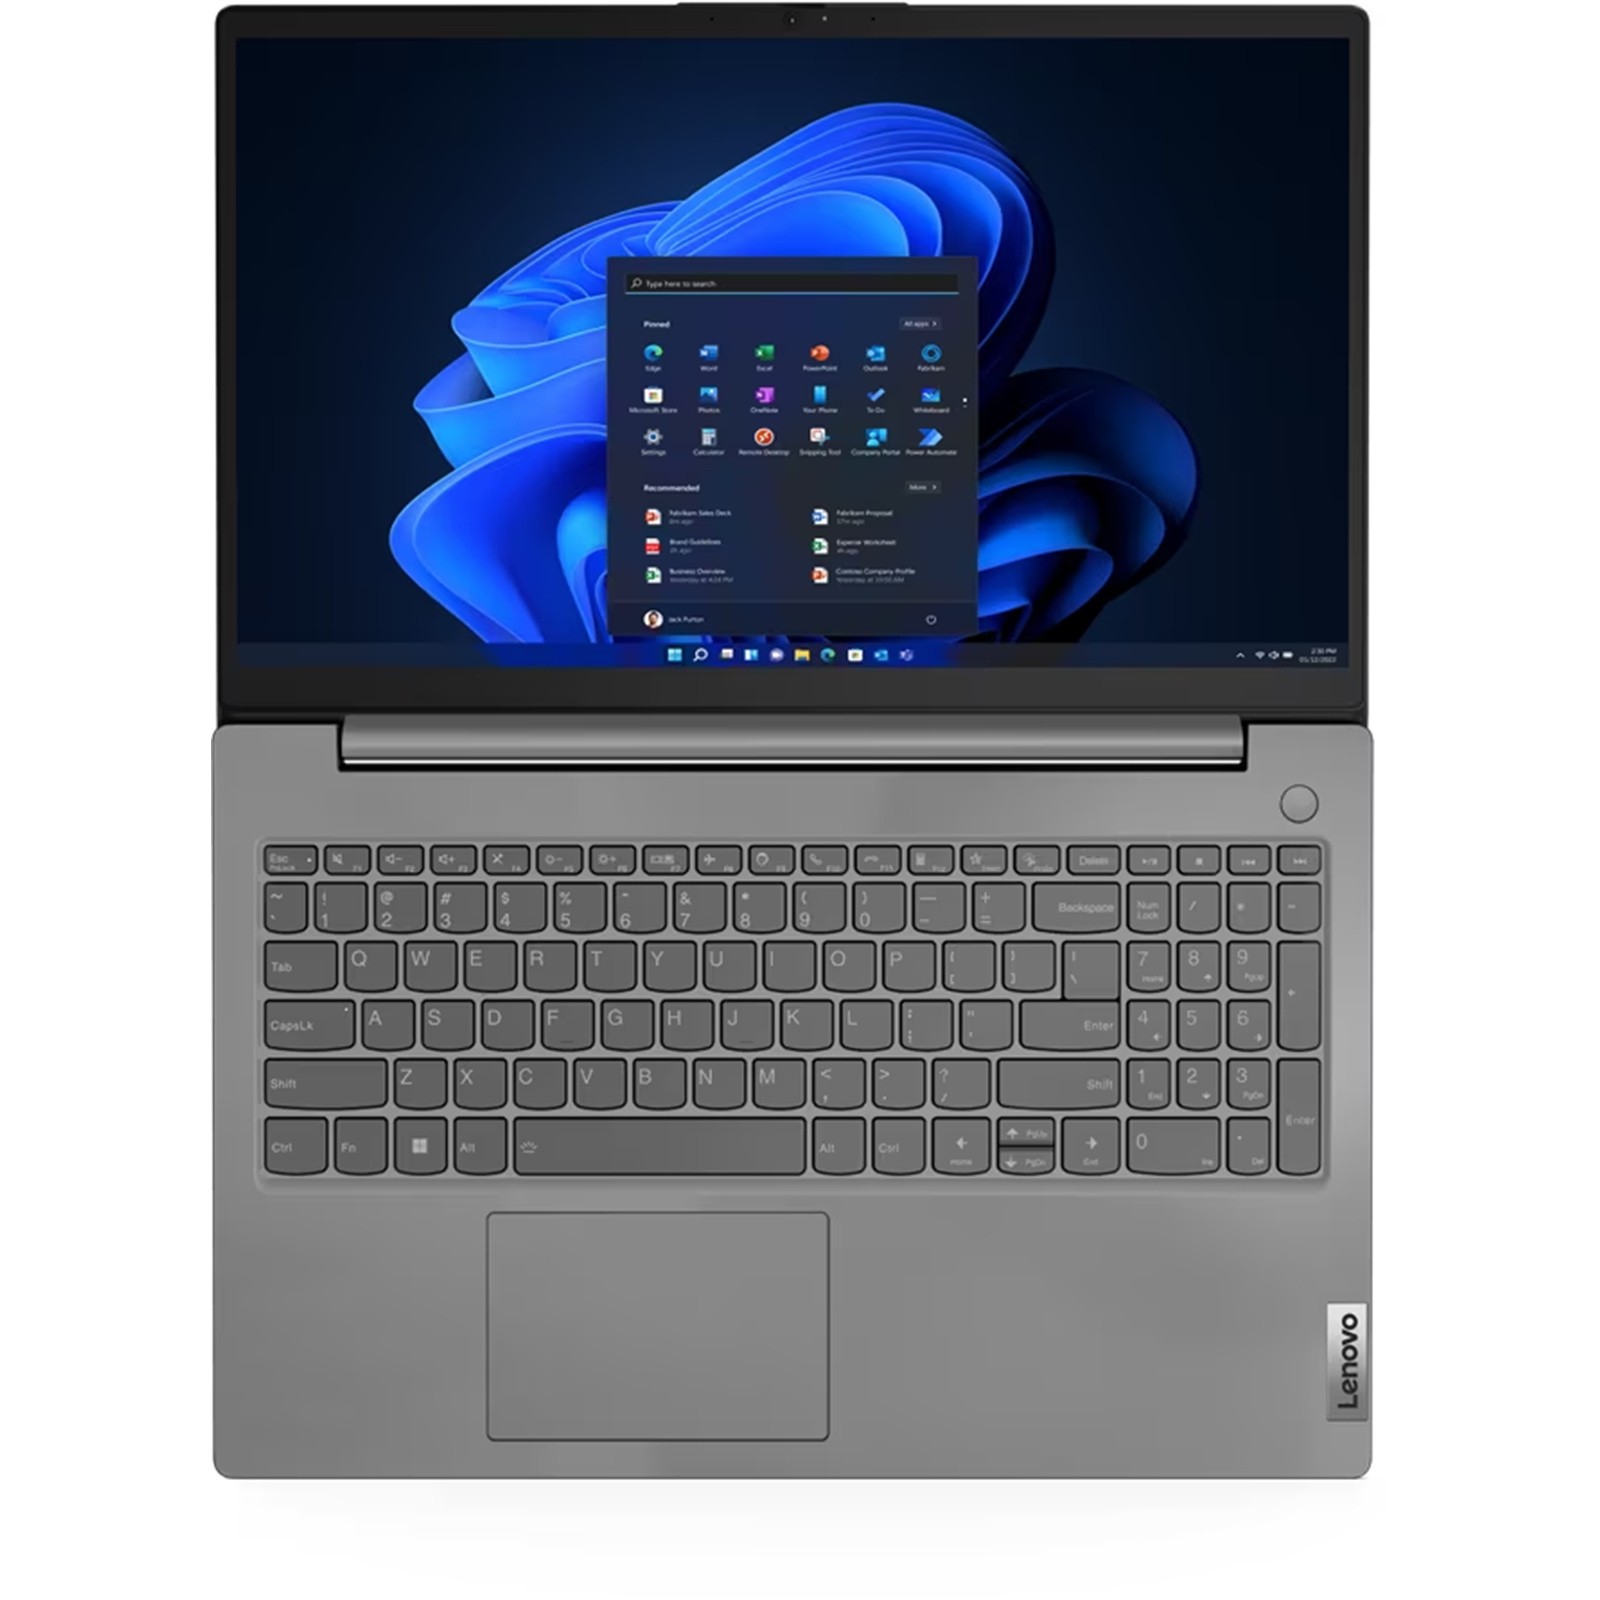 Buy the Latest Lenovo V15 G3 15.6" Notebook - Full HD - 1920 x 1080 - Intel Core i5 12th Gen i5-1235U Deca-core (10 Core) 1.30 GHz - 8 GB Total RAM - 256 GB SSD - Business Black Now online at Machito Gadgets